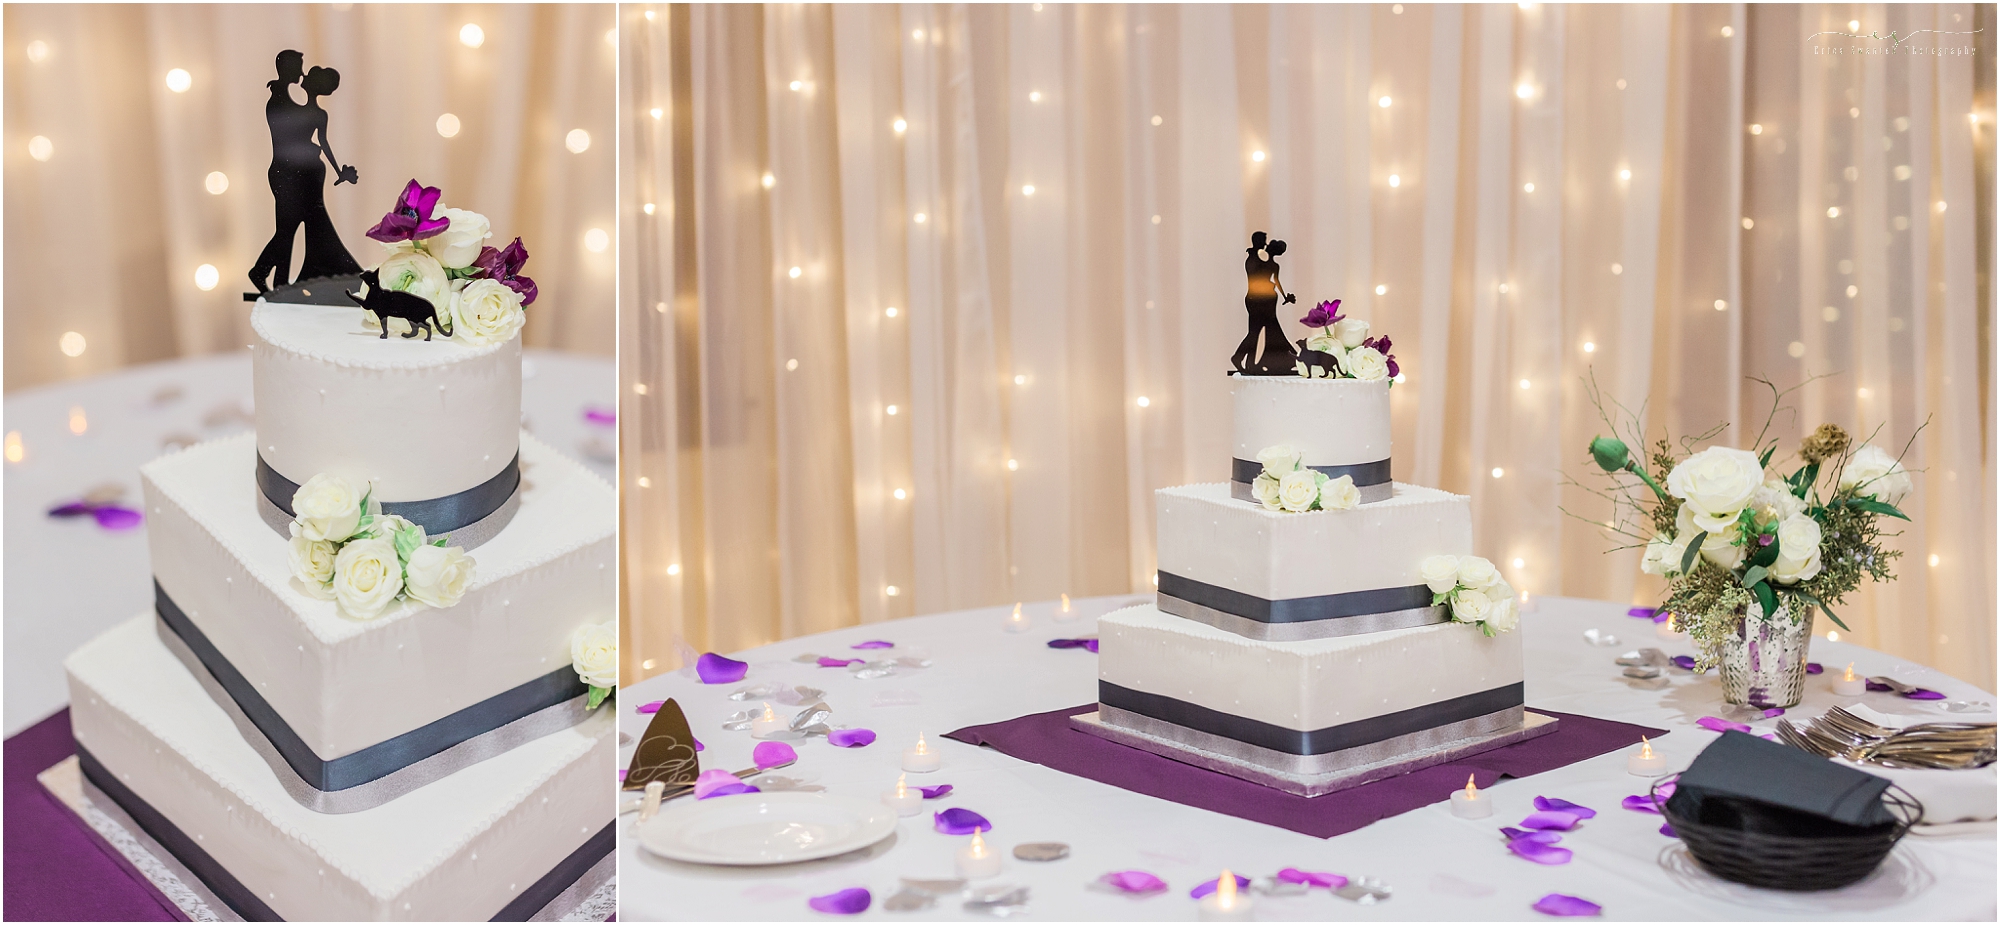 A beautiful 3 tiered cake complete with a cat topper for this fun New Year's Eve wedding at Five Pine Lodge in Sisters, OR. 